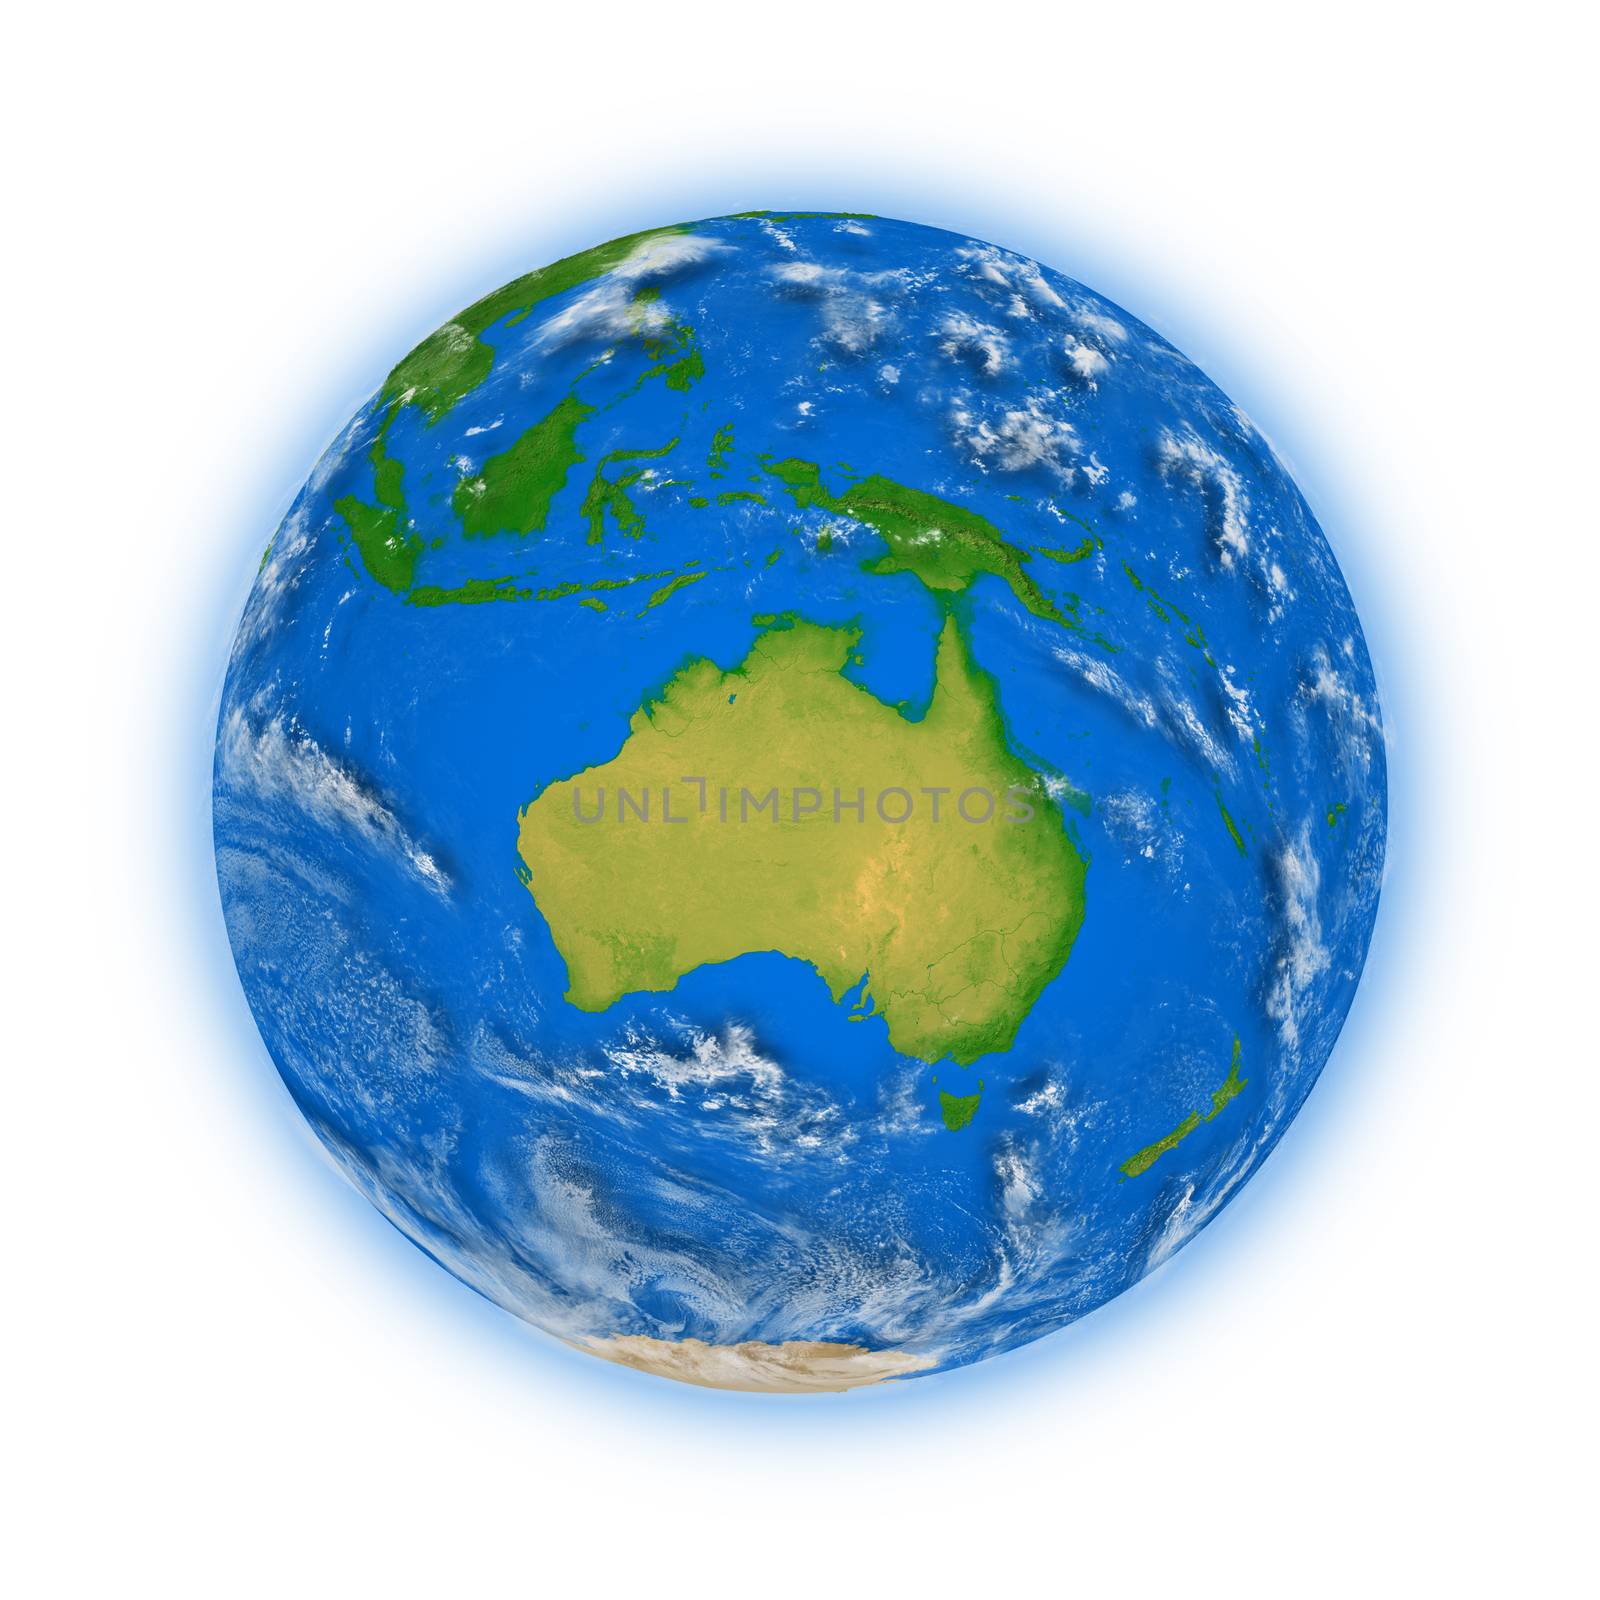 Australia on planet Earth by Harvepino